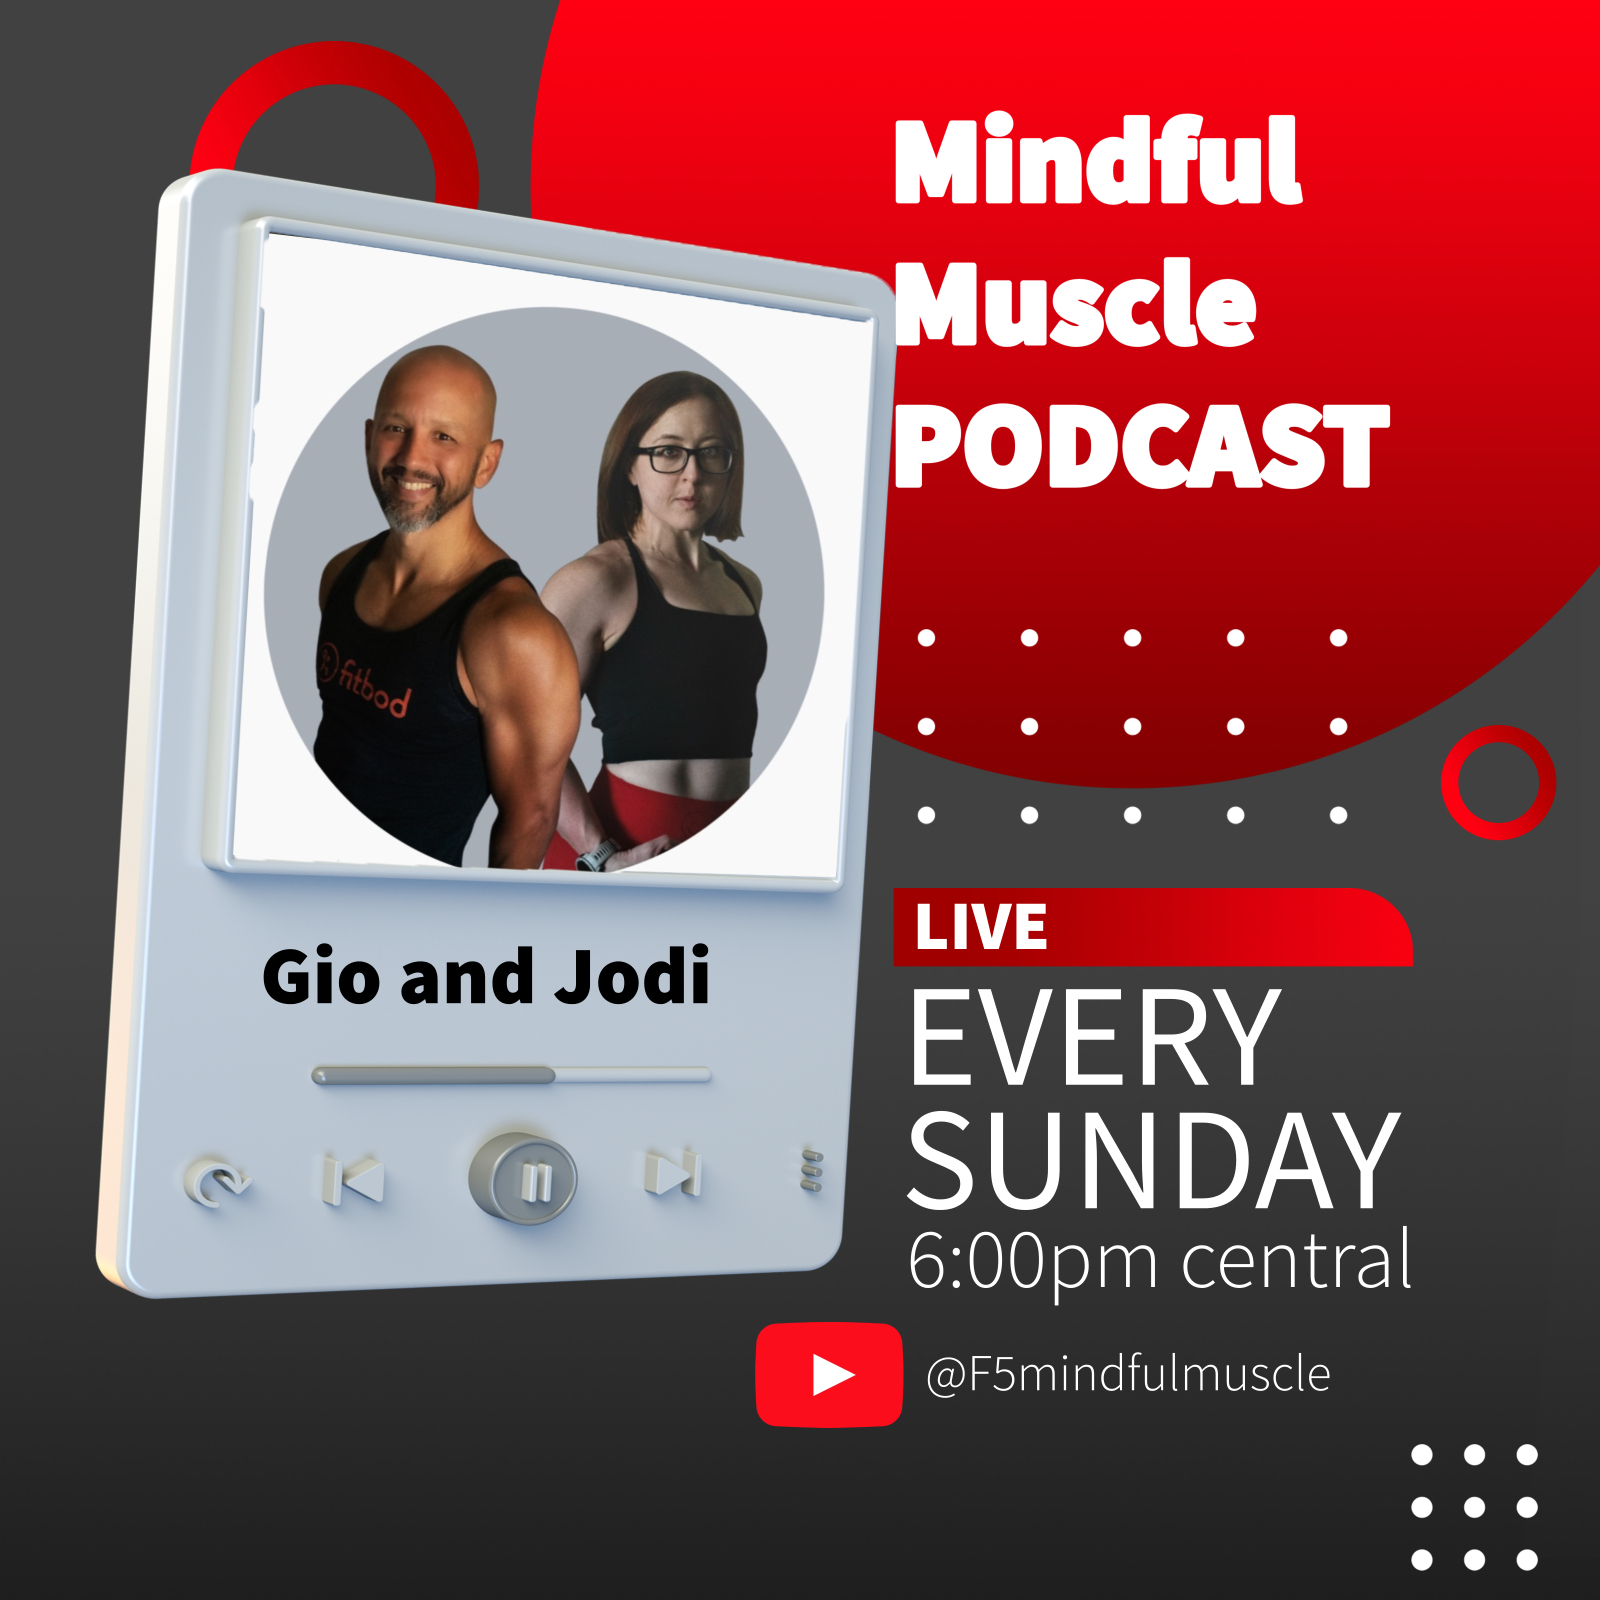 Mindful Muscle Podcast